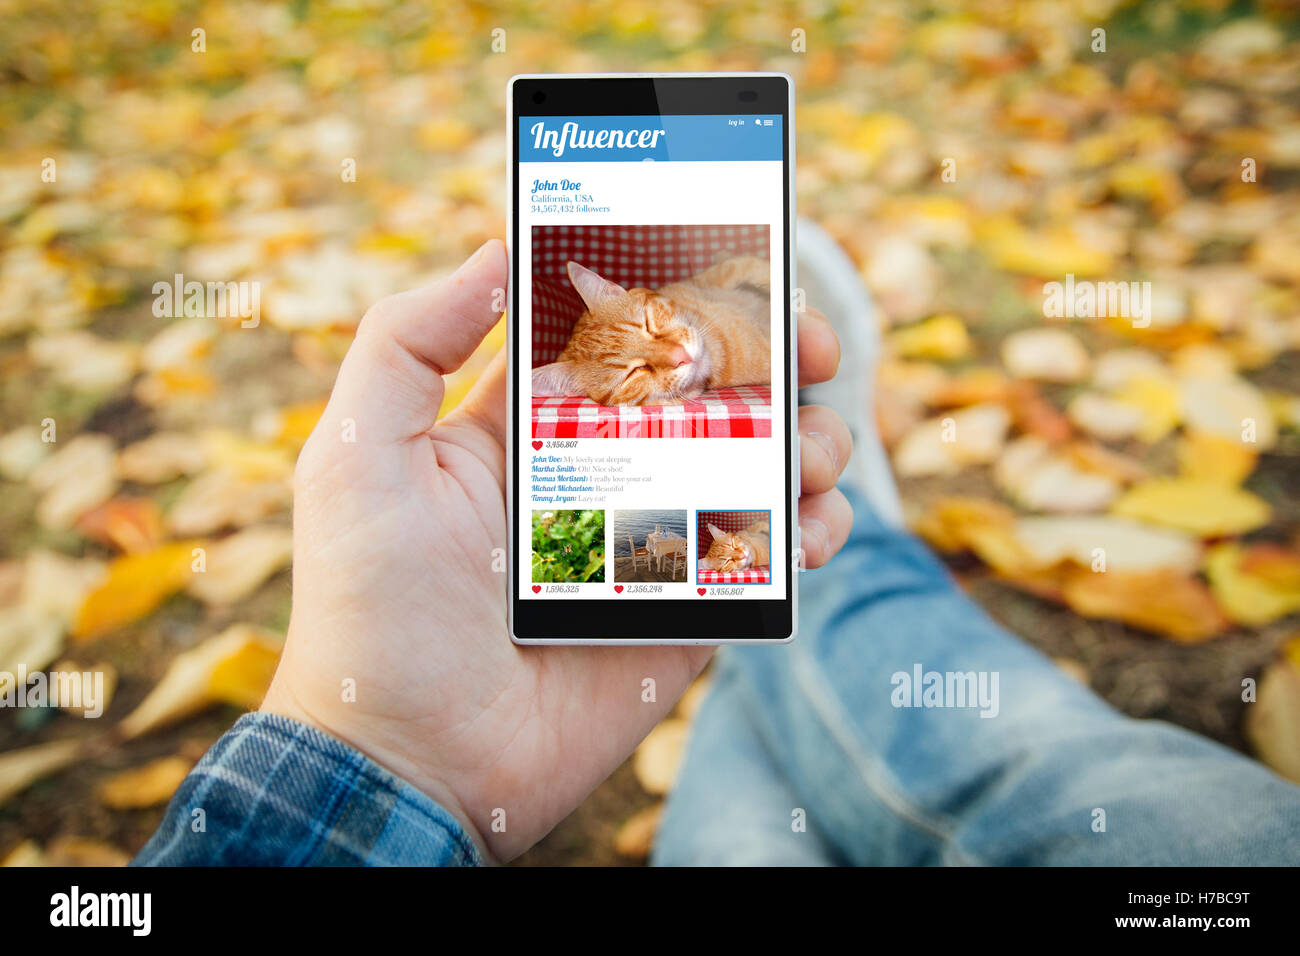 man in the park with influencer smartphone. All screen graphics are made up. Stock Photo